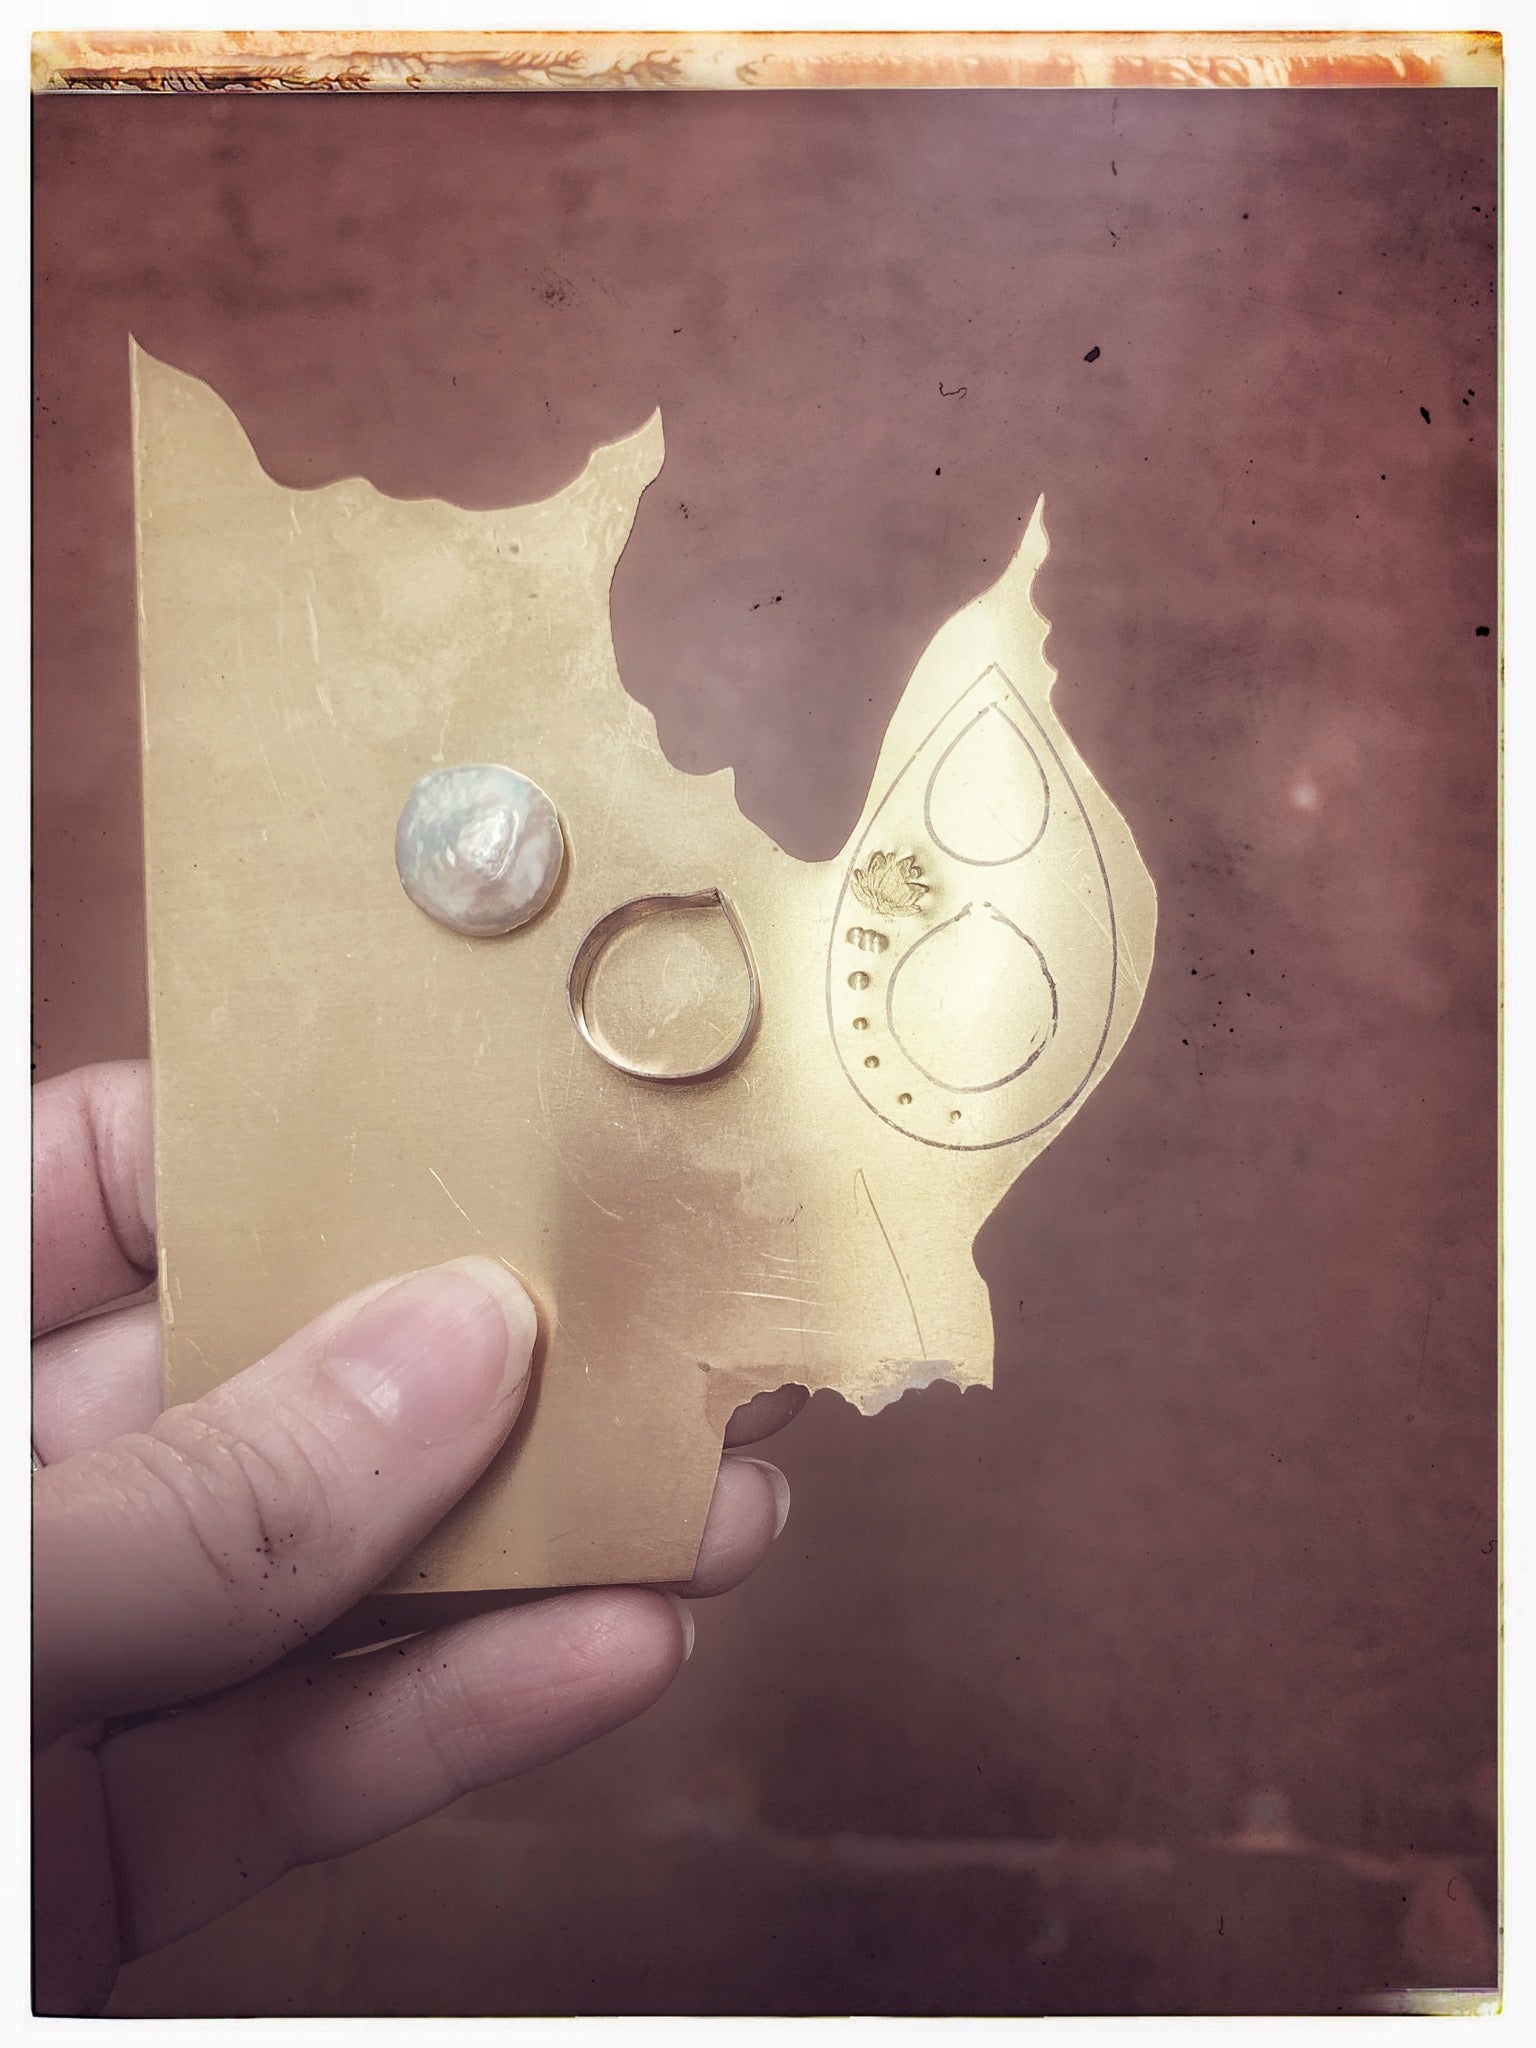 The beginnings of a new pearl and brass pendant by Erica Bapst